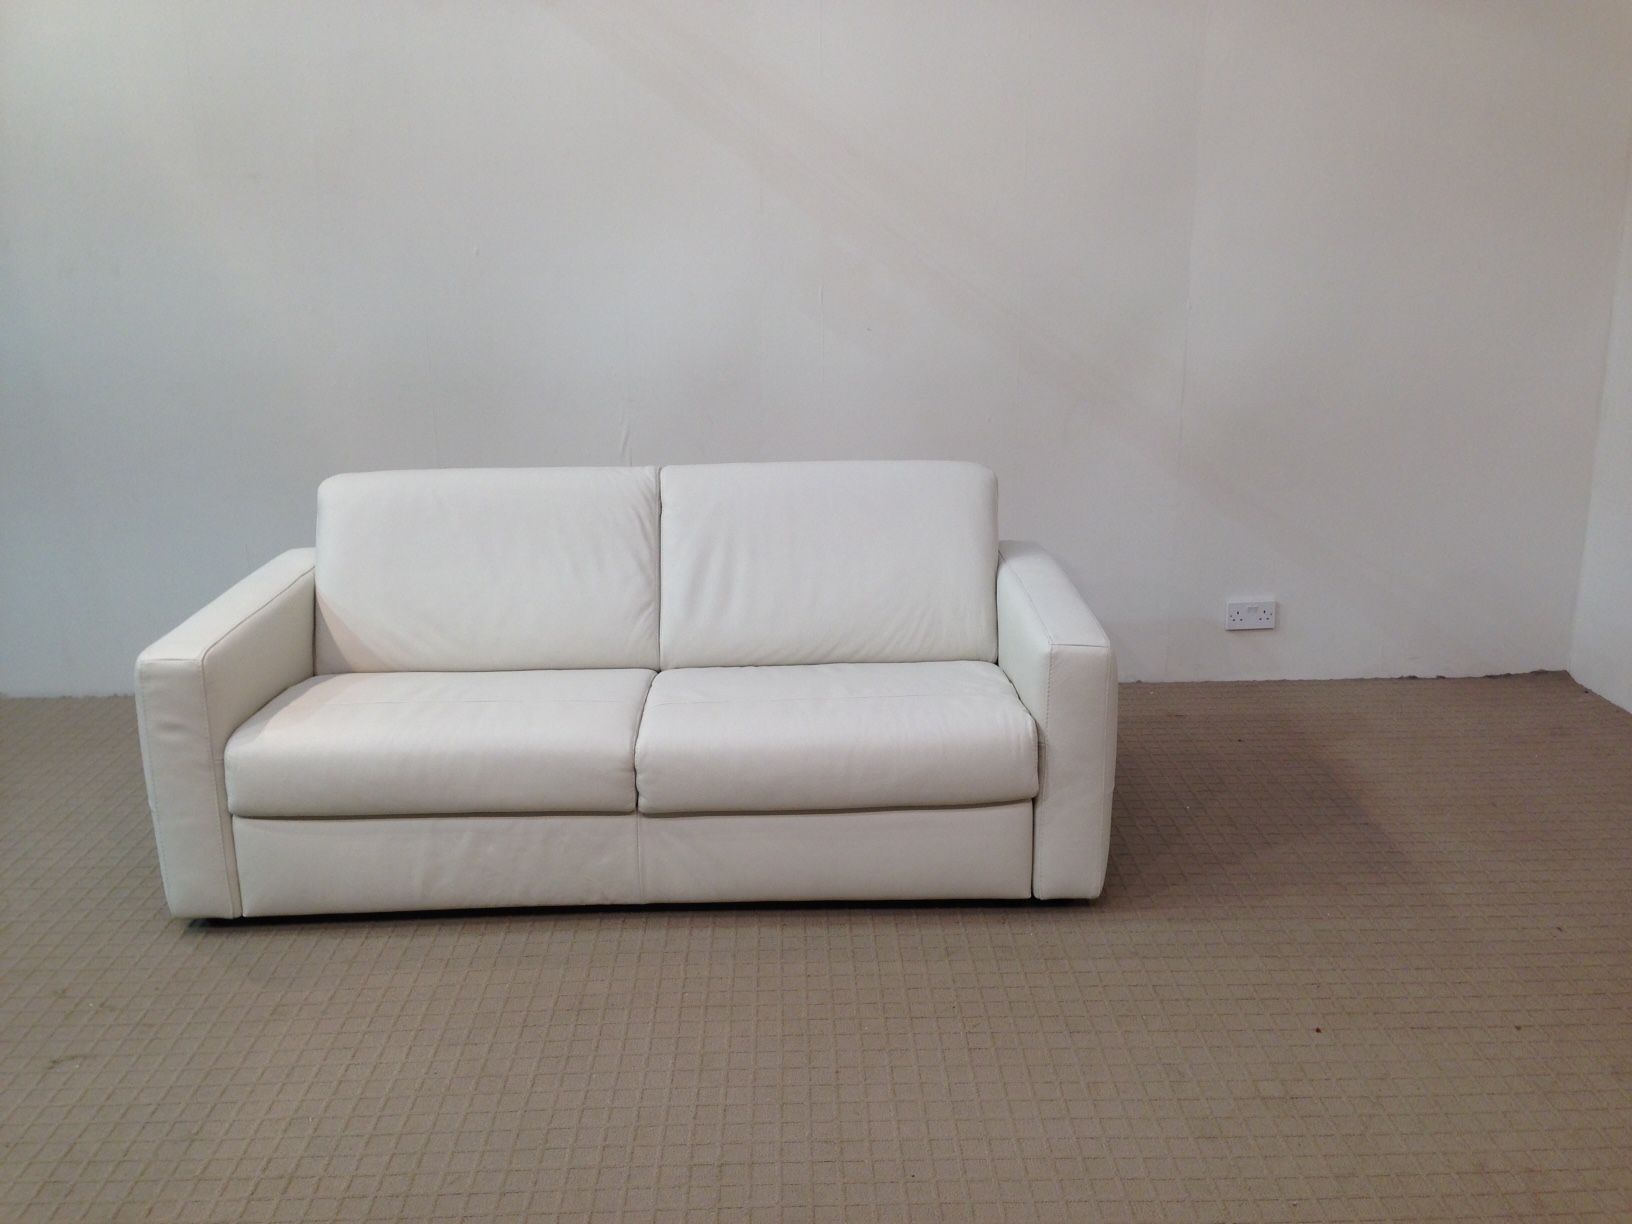 sofa bed 145cm wide